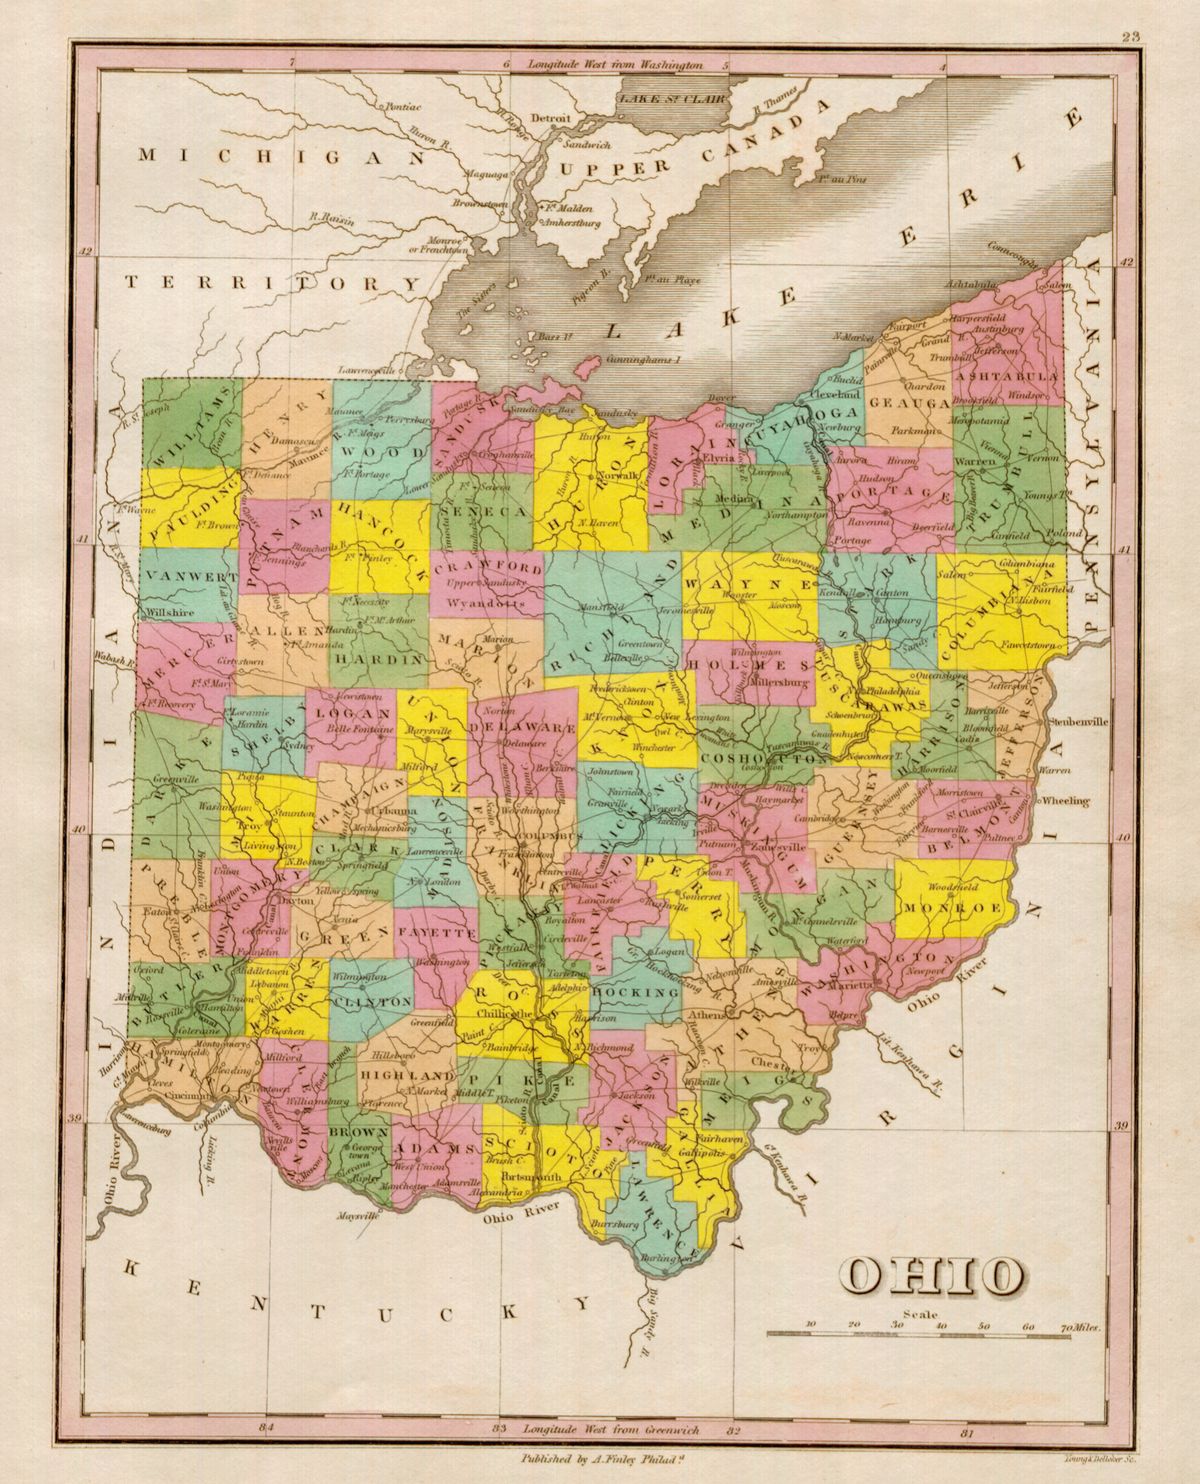 an 1826 map of the state of ohio shows county boundaries, roads, settlements, and topographical features also depicted are the state's many canals   photo by michael maslancorbisvcg via getty images